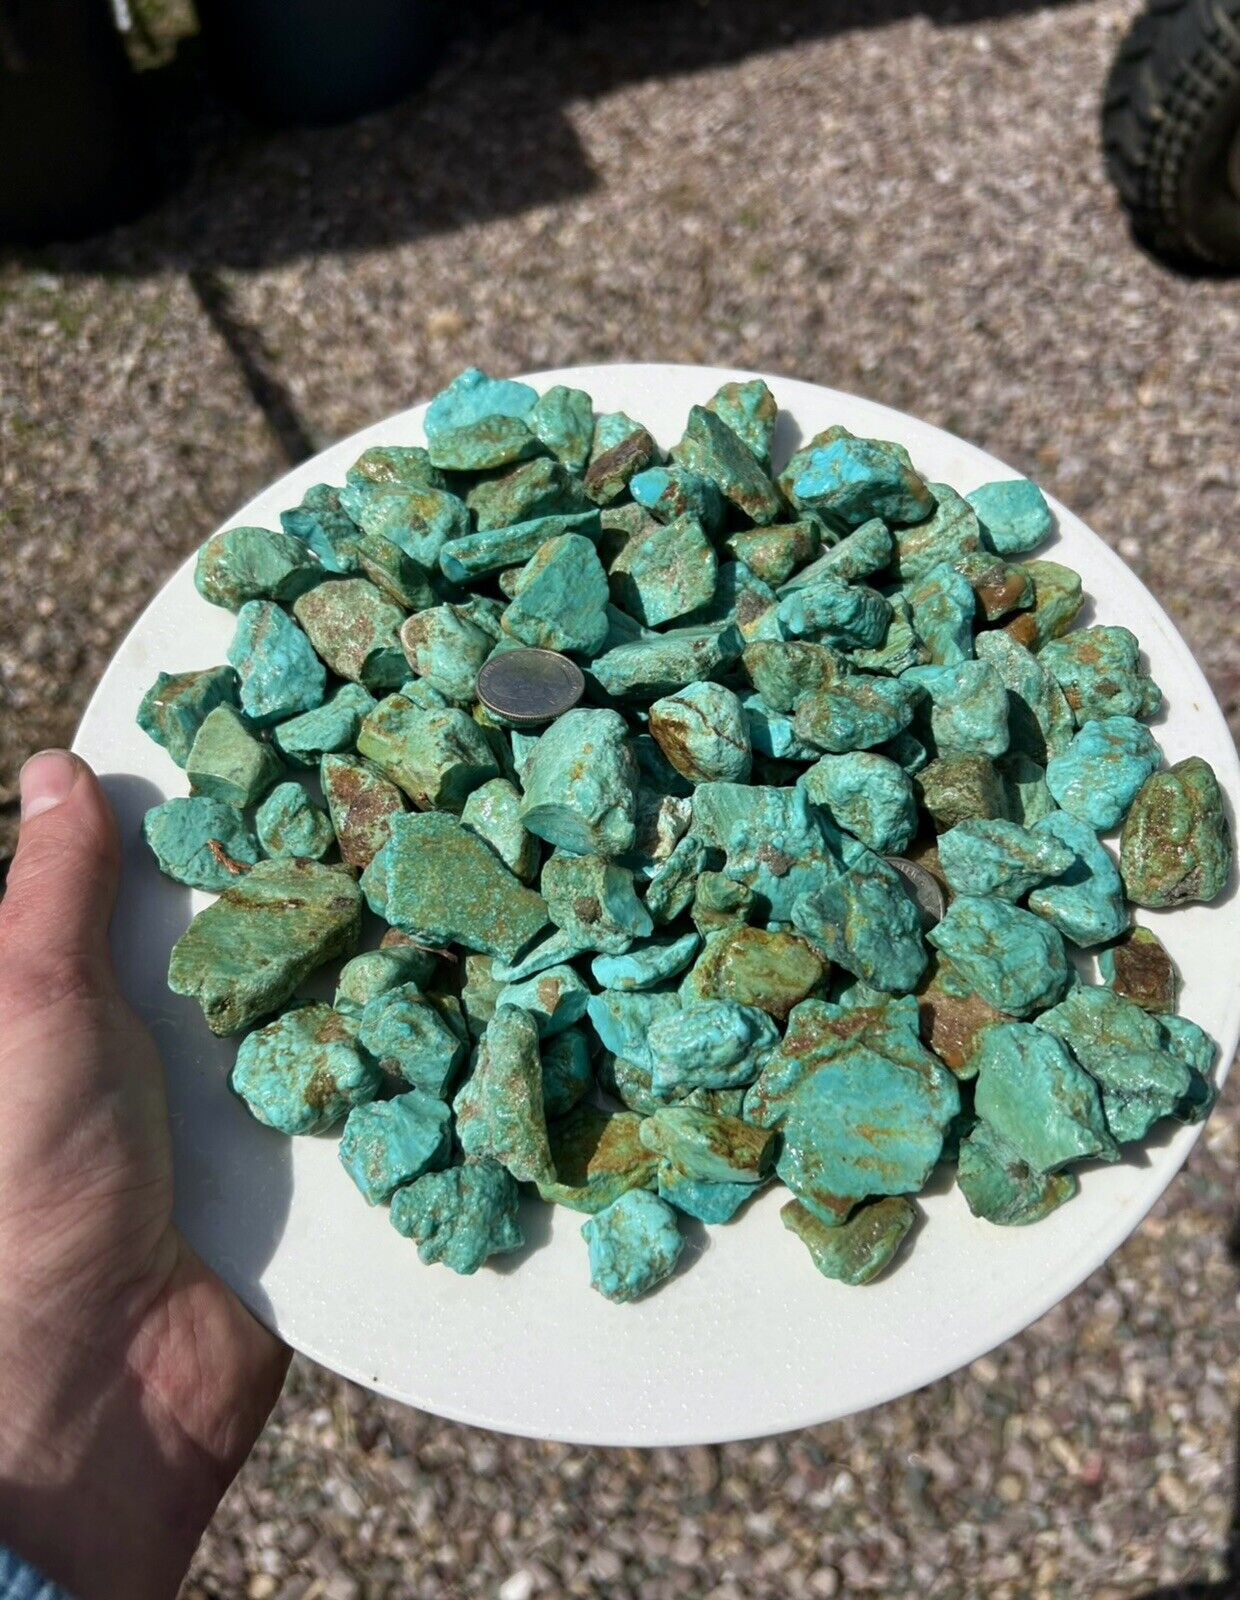 Turquoise Mountain Classic Light Blue - Sky Blue Nugs. 9 LBS. Awesome value